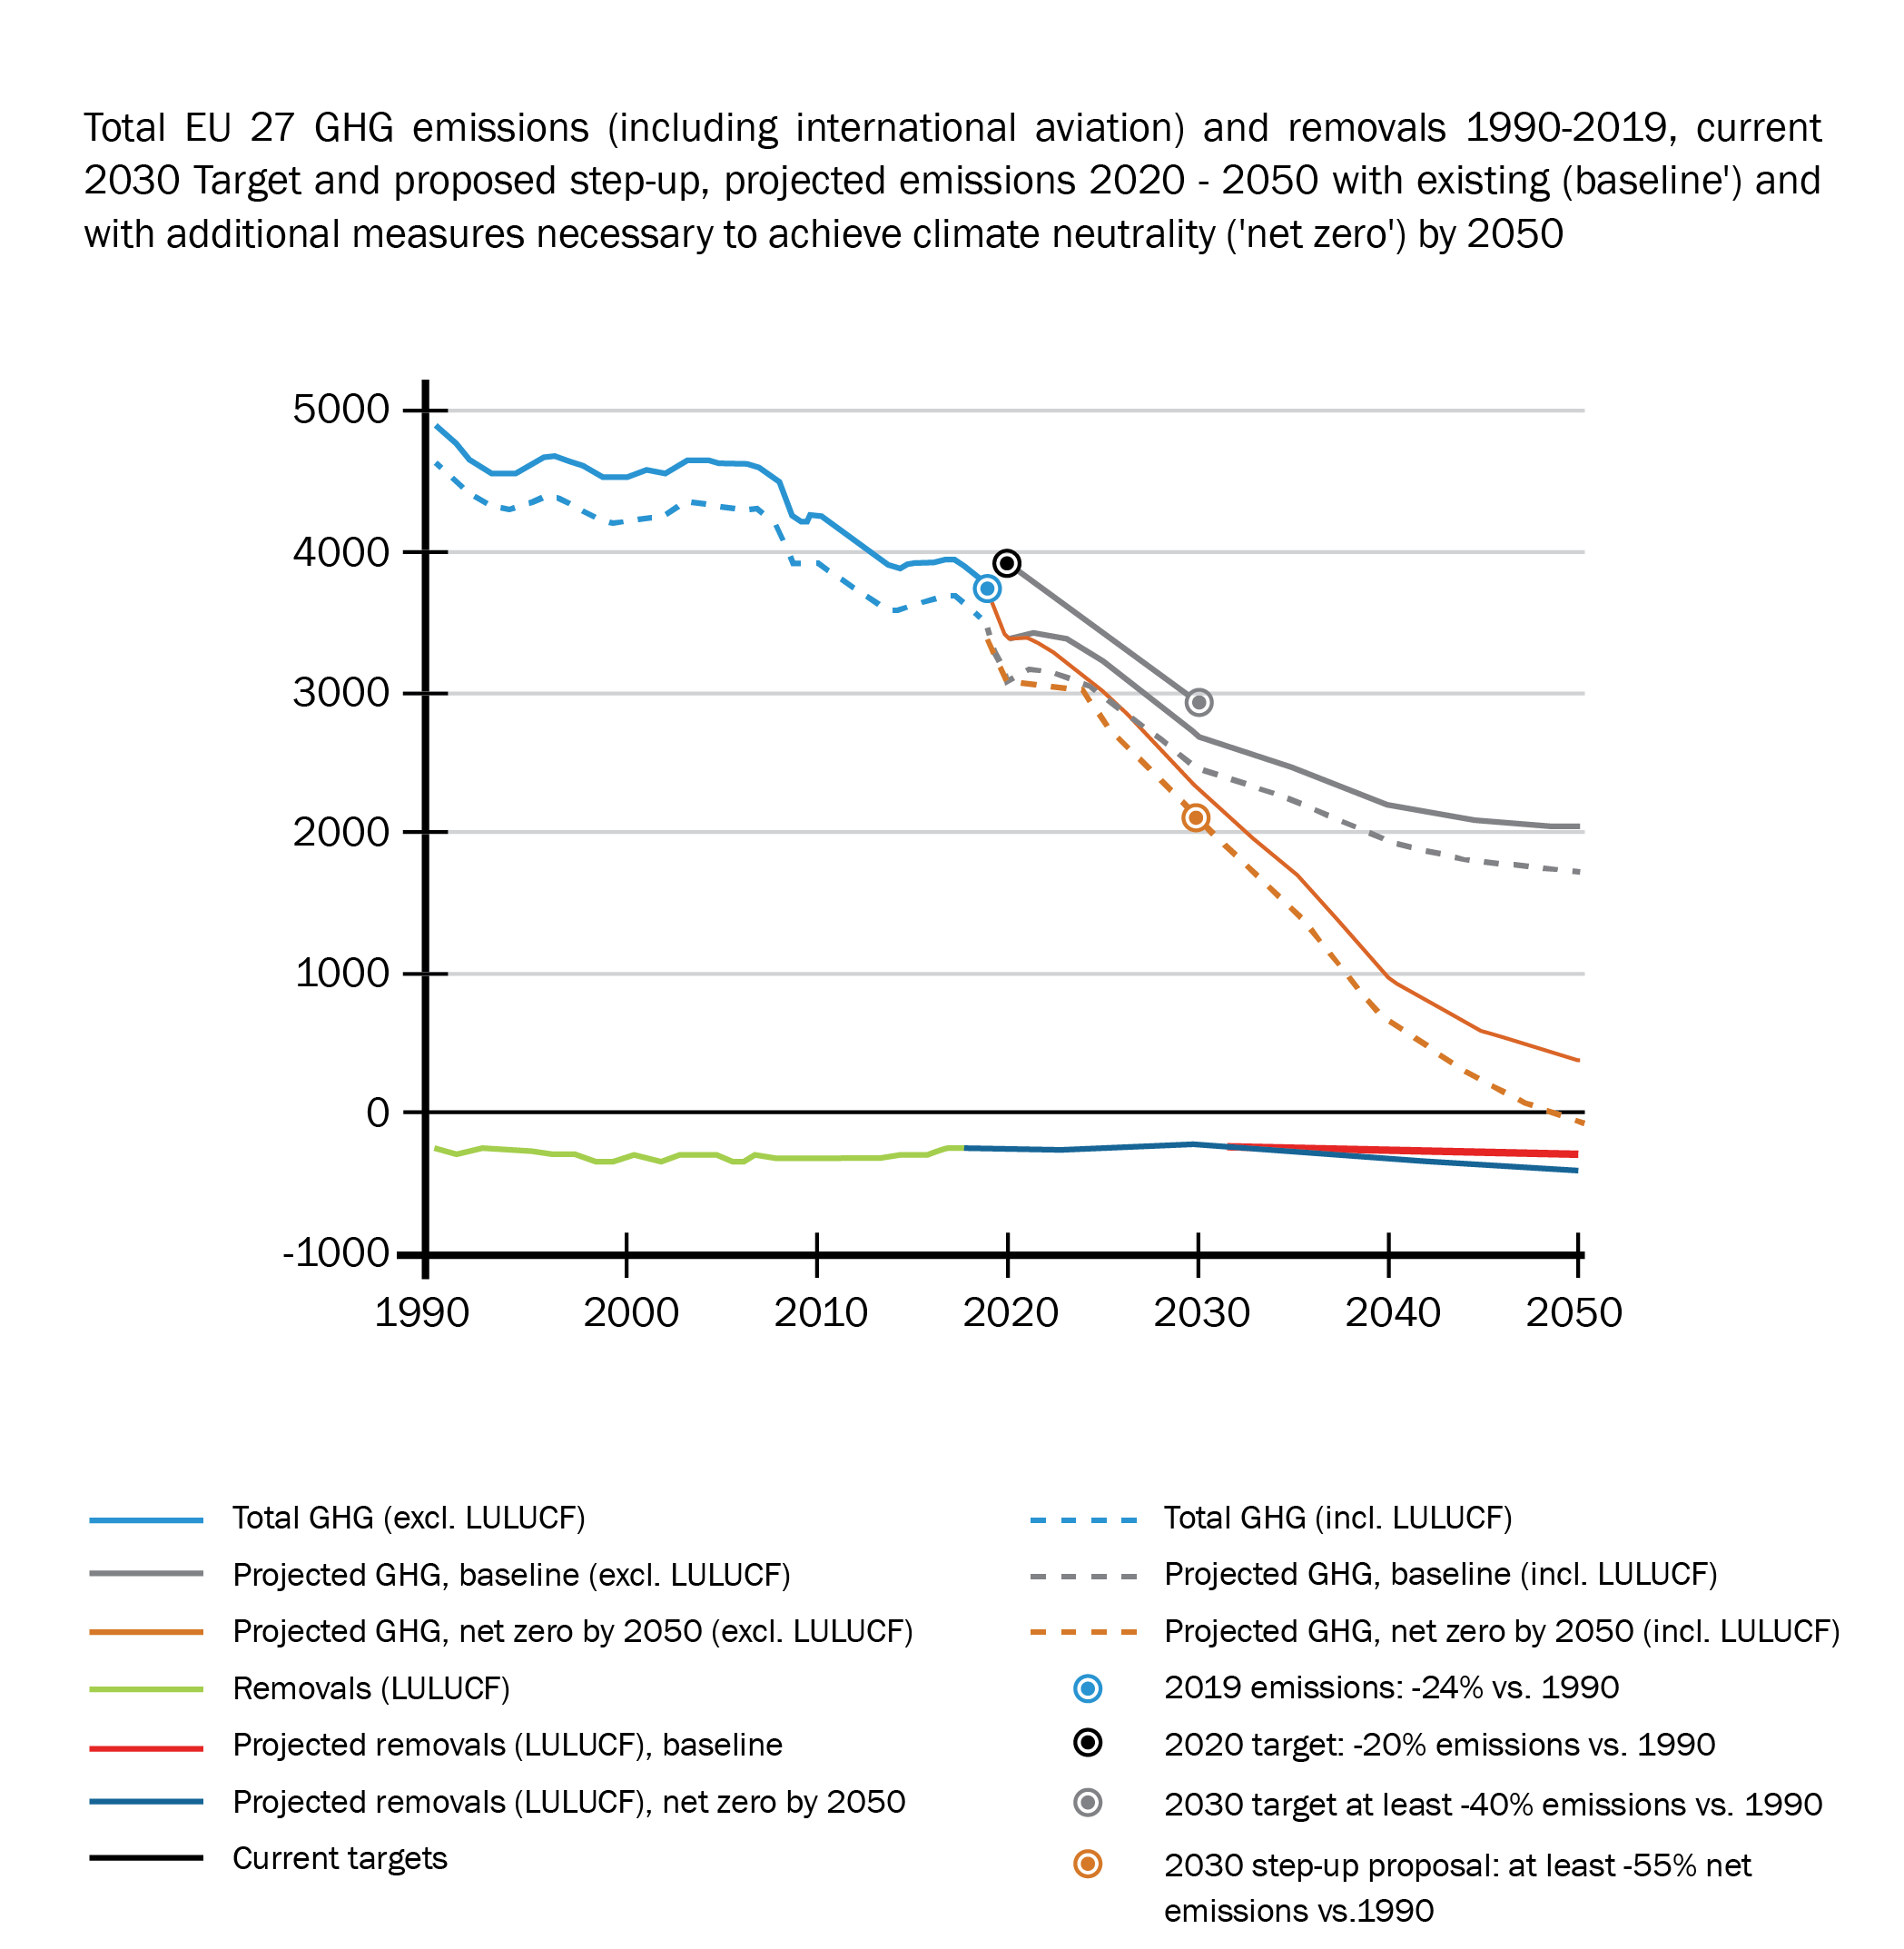 Graph of Total EU Greenhouse Gas Emissions and Removals 1990-2019